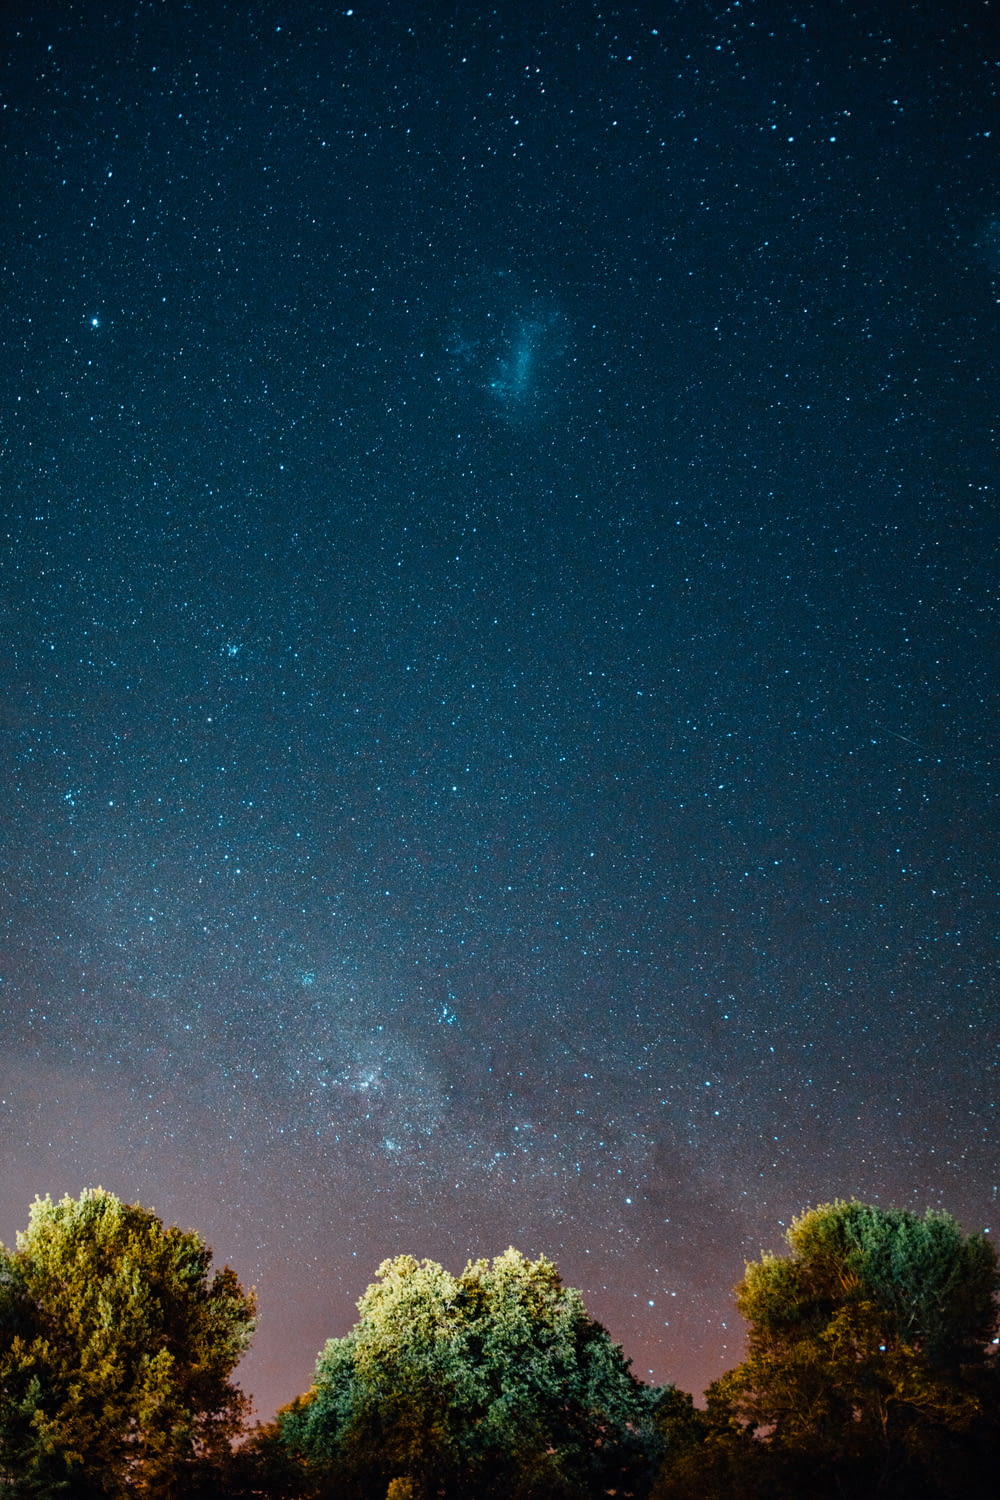 green trees under blue sky with stars